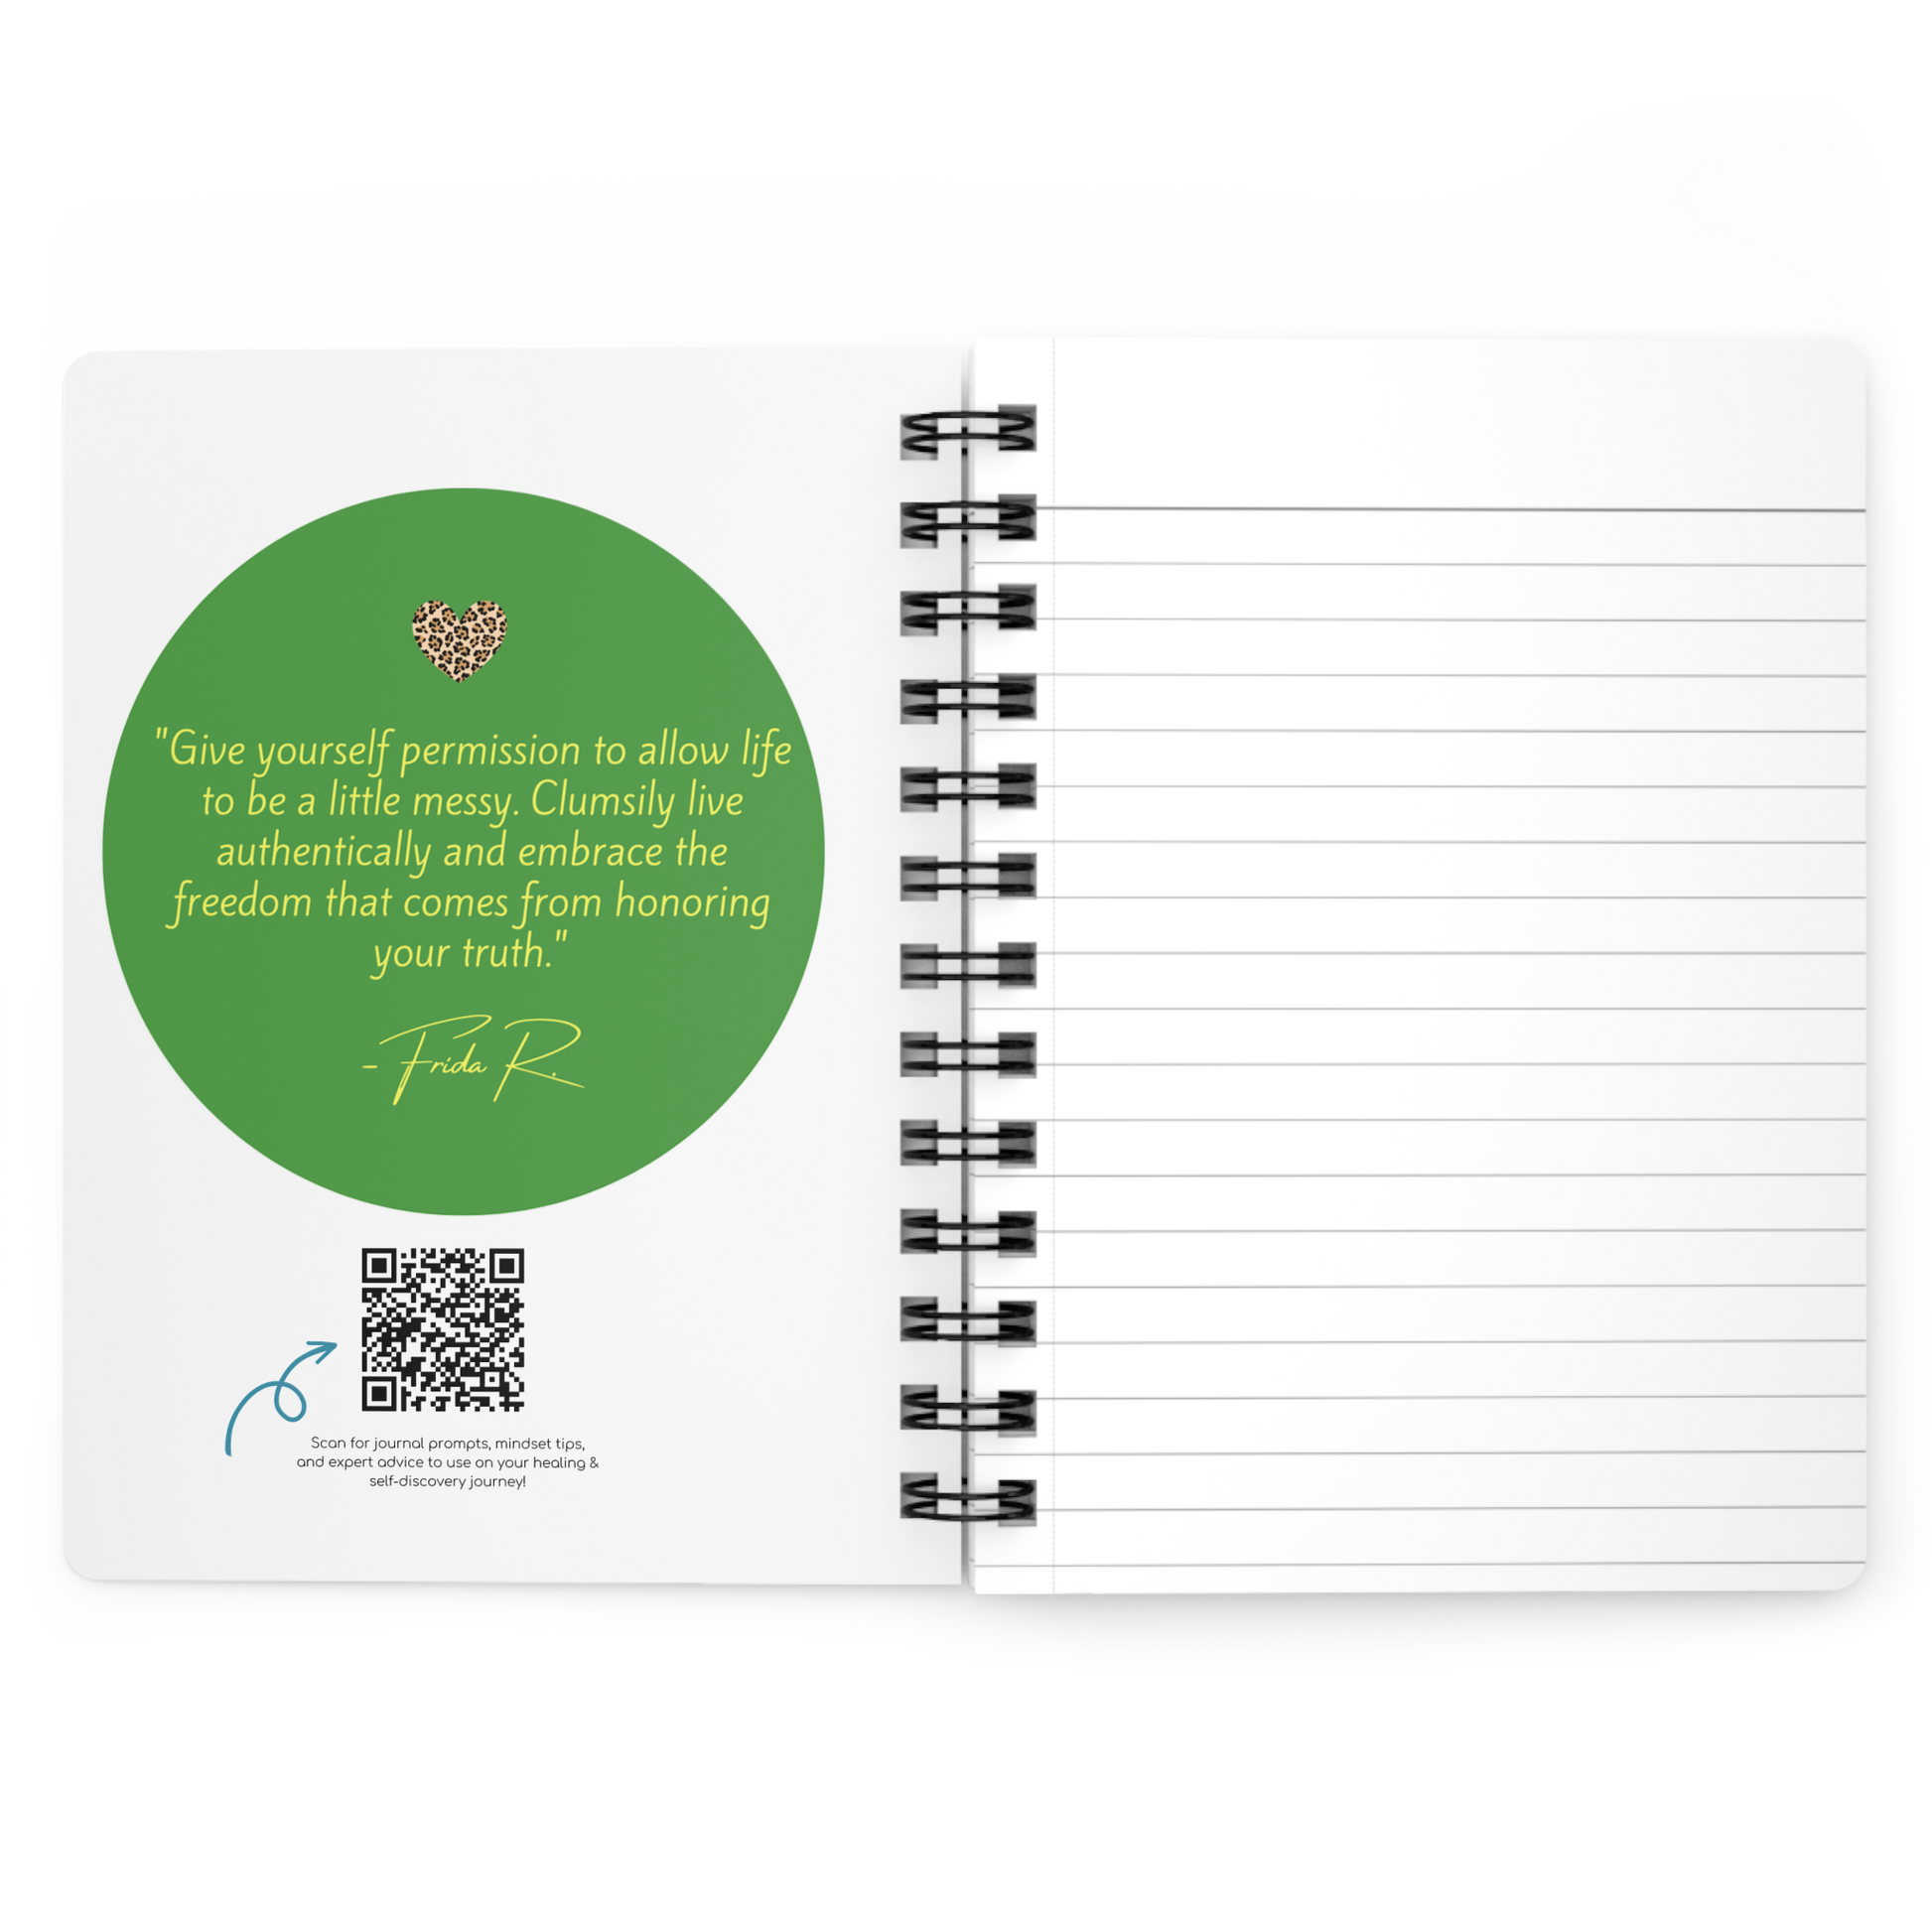 A green spiral notebook with the "Believe in Your Dreams" Inspirational Black Girl Magic Journal logo on it.